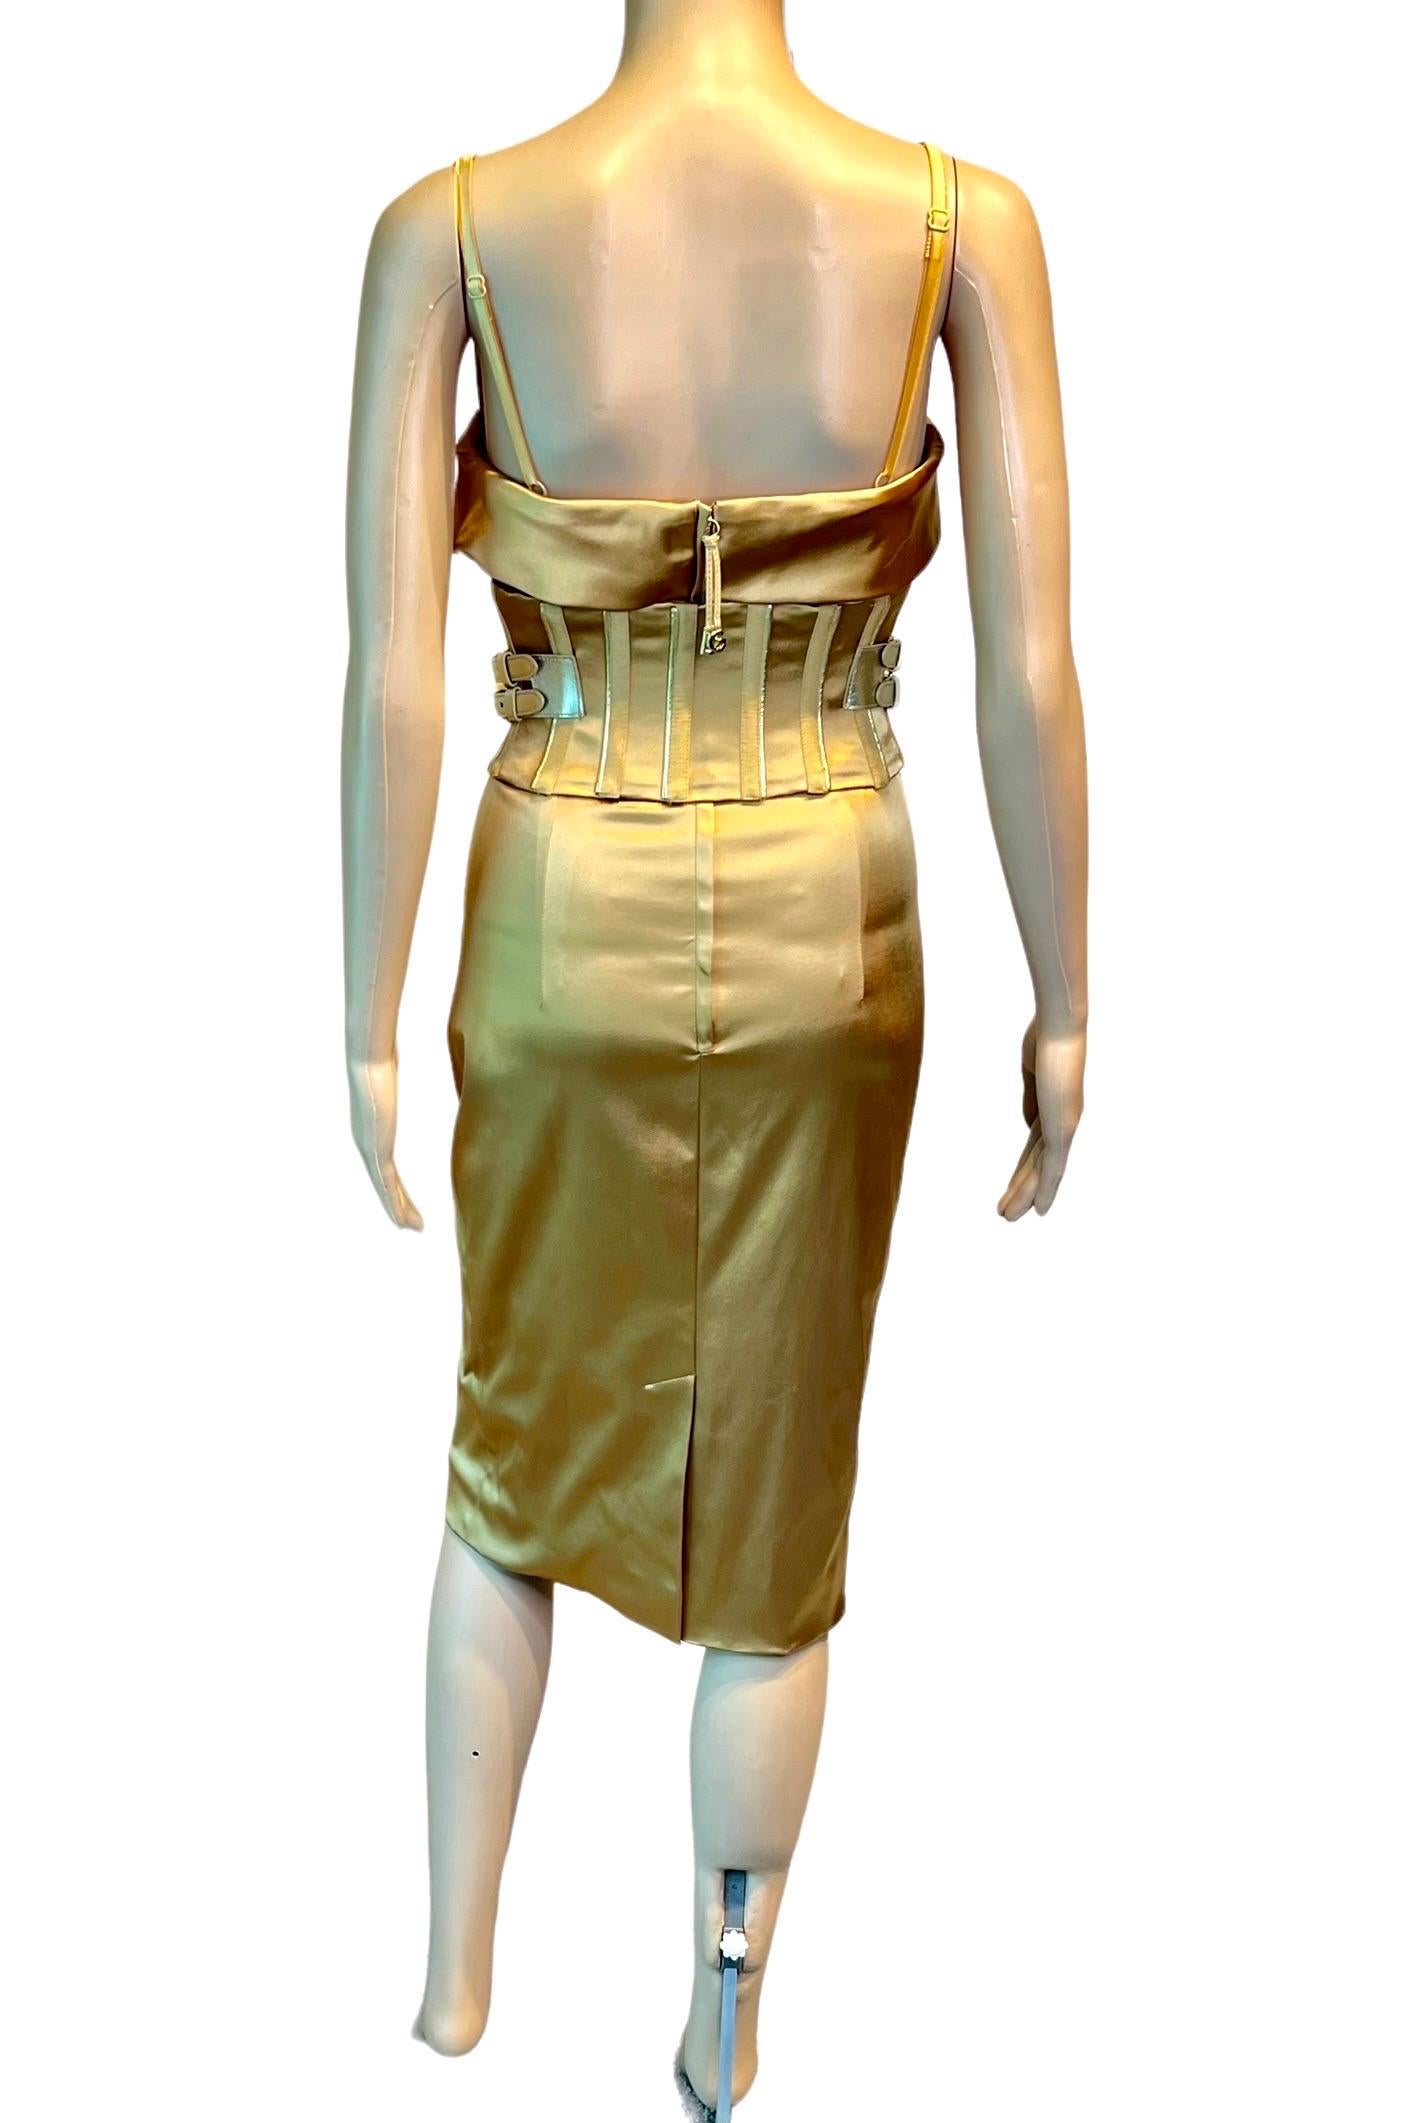 Dolce & Gabbana S/S 2007 Corset Belted Bra Bustier Bodycon Gold Acetate Dress For Sale 1